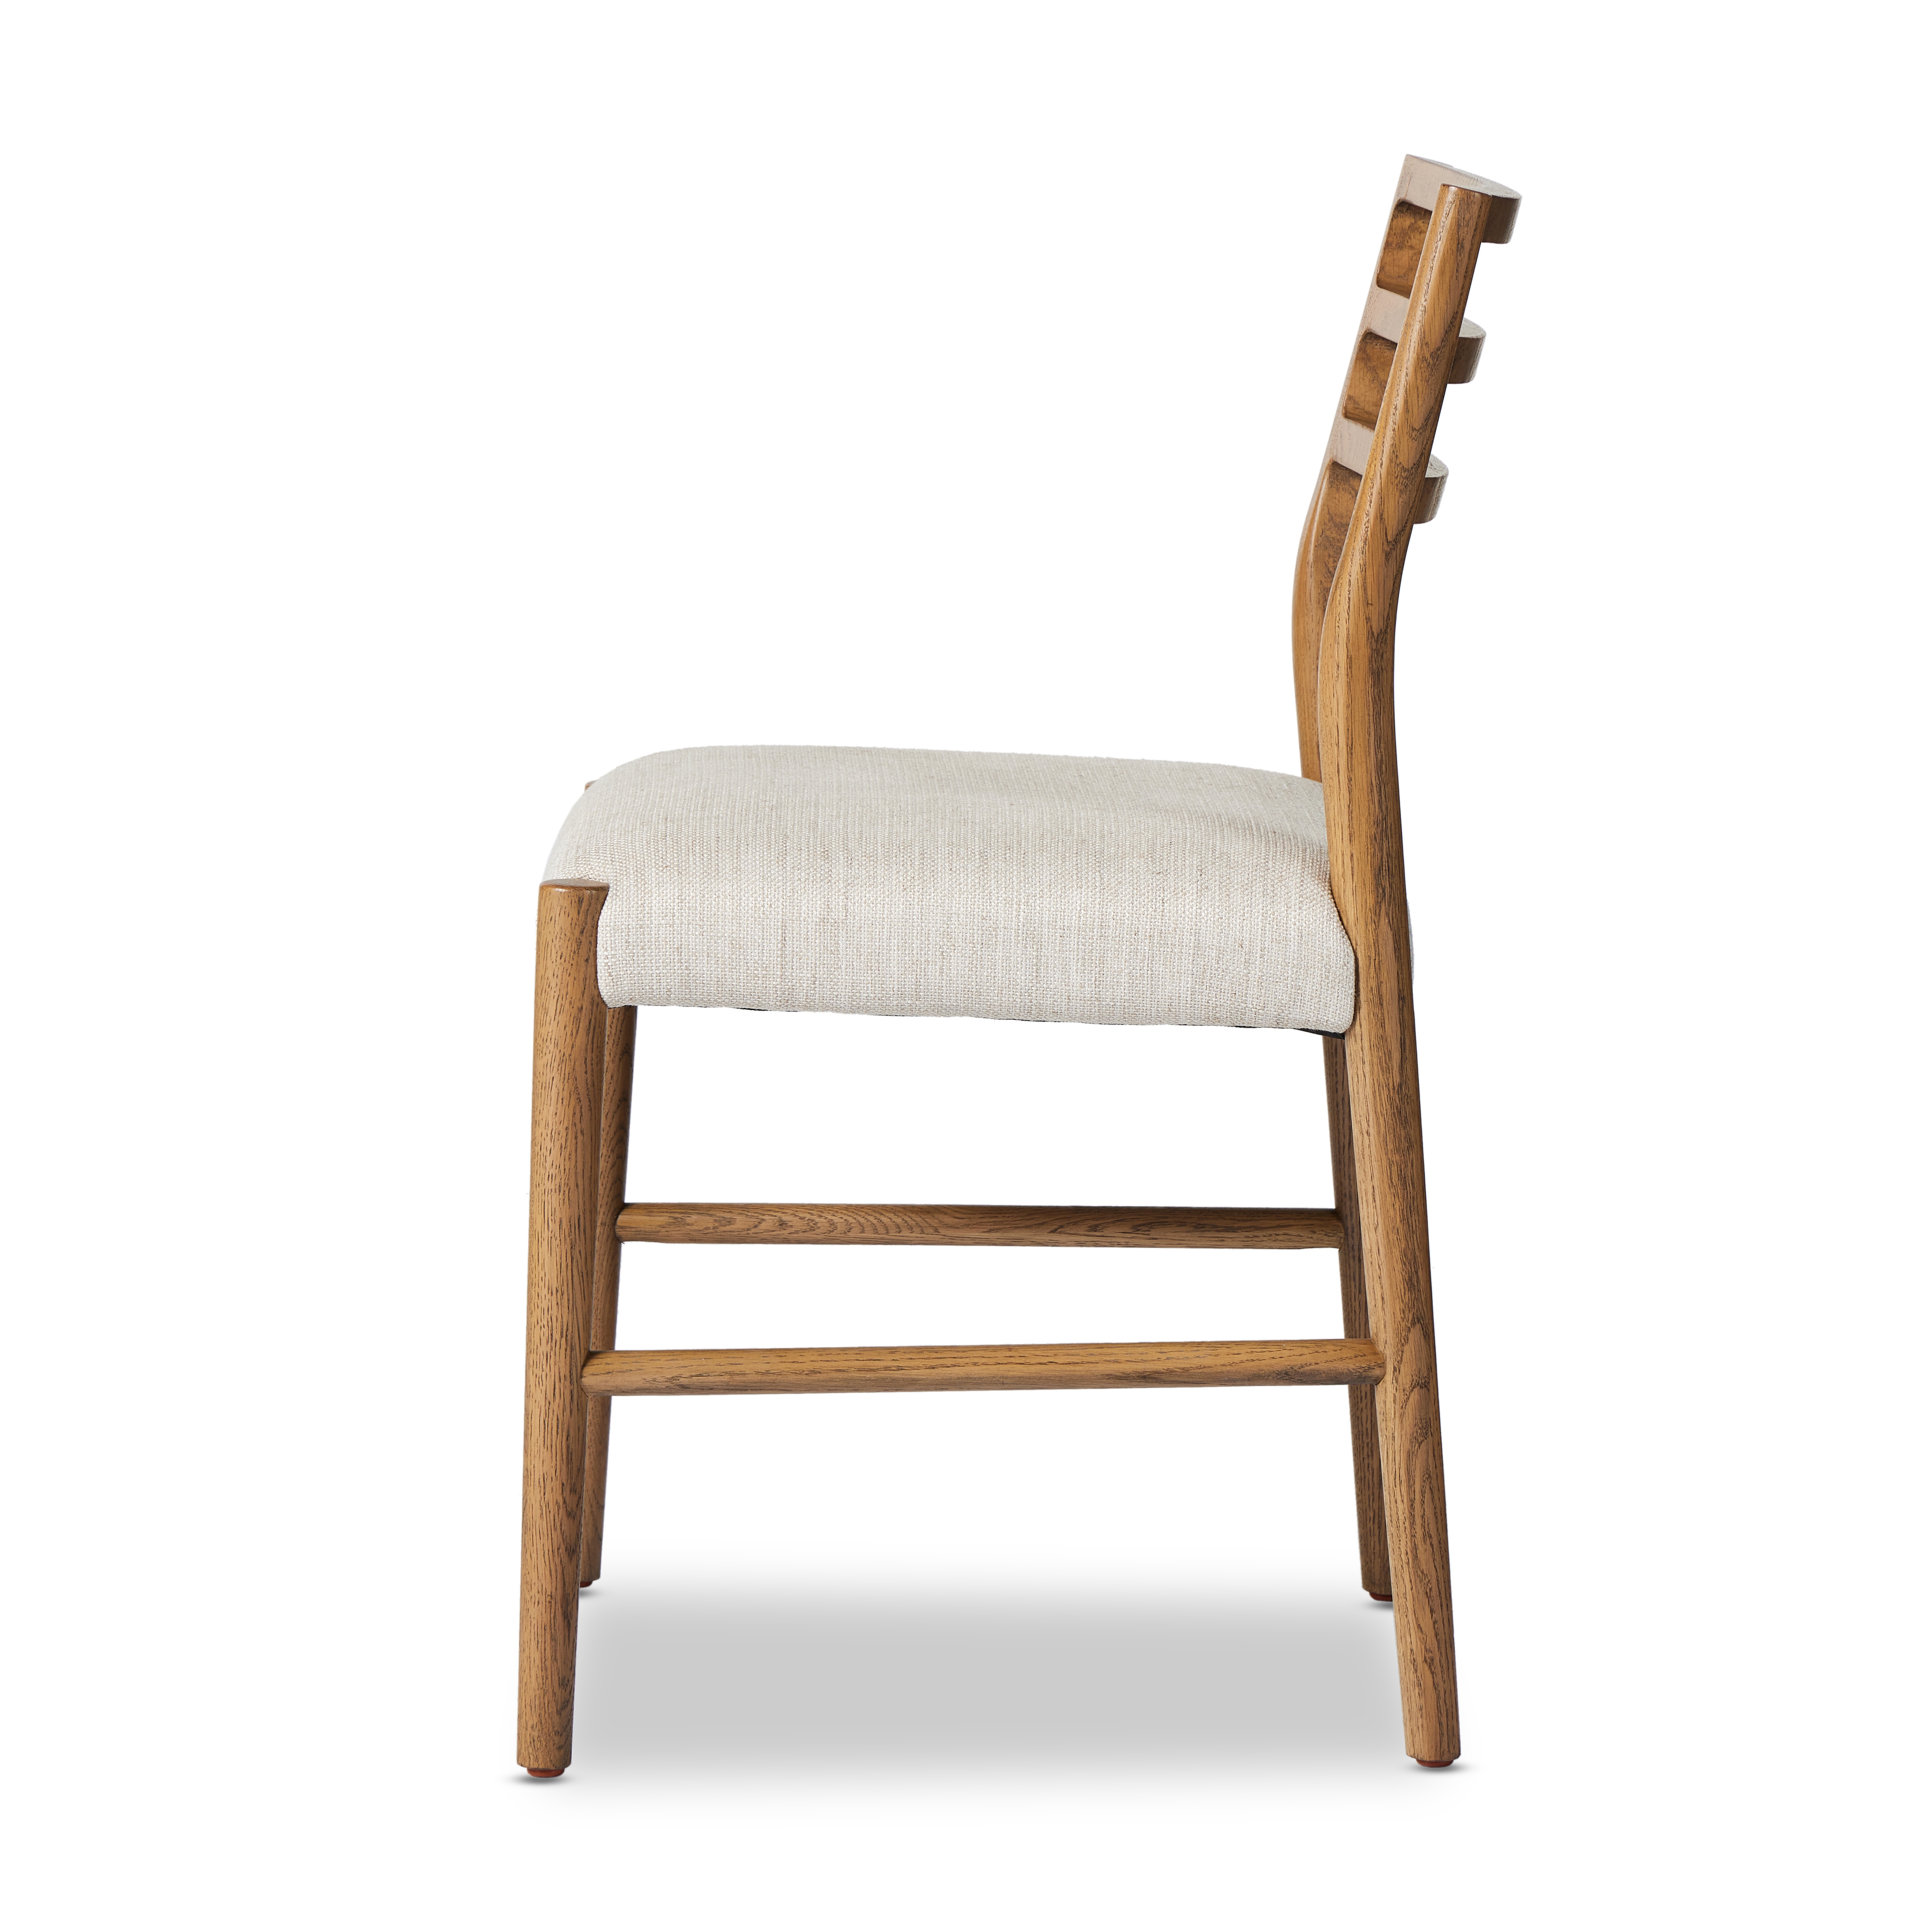 Glenmore Dining Chair-Smoked Oak - Image 4